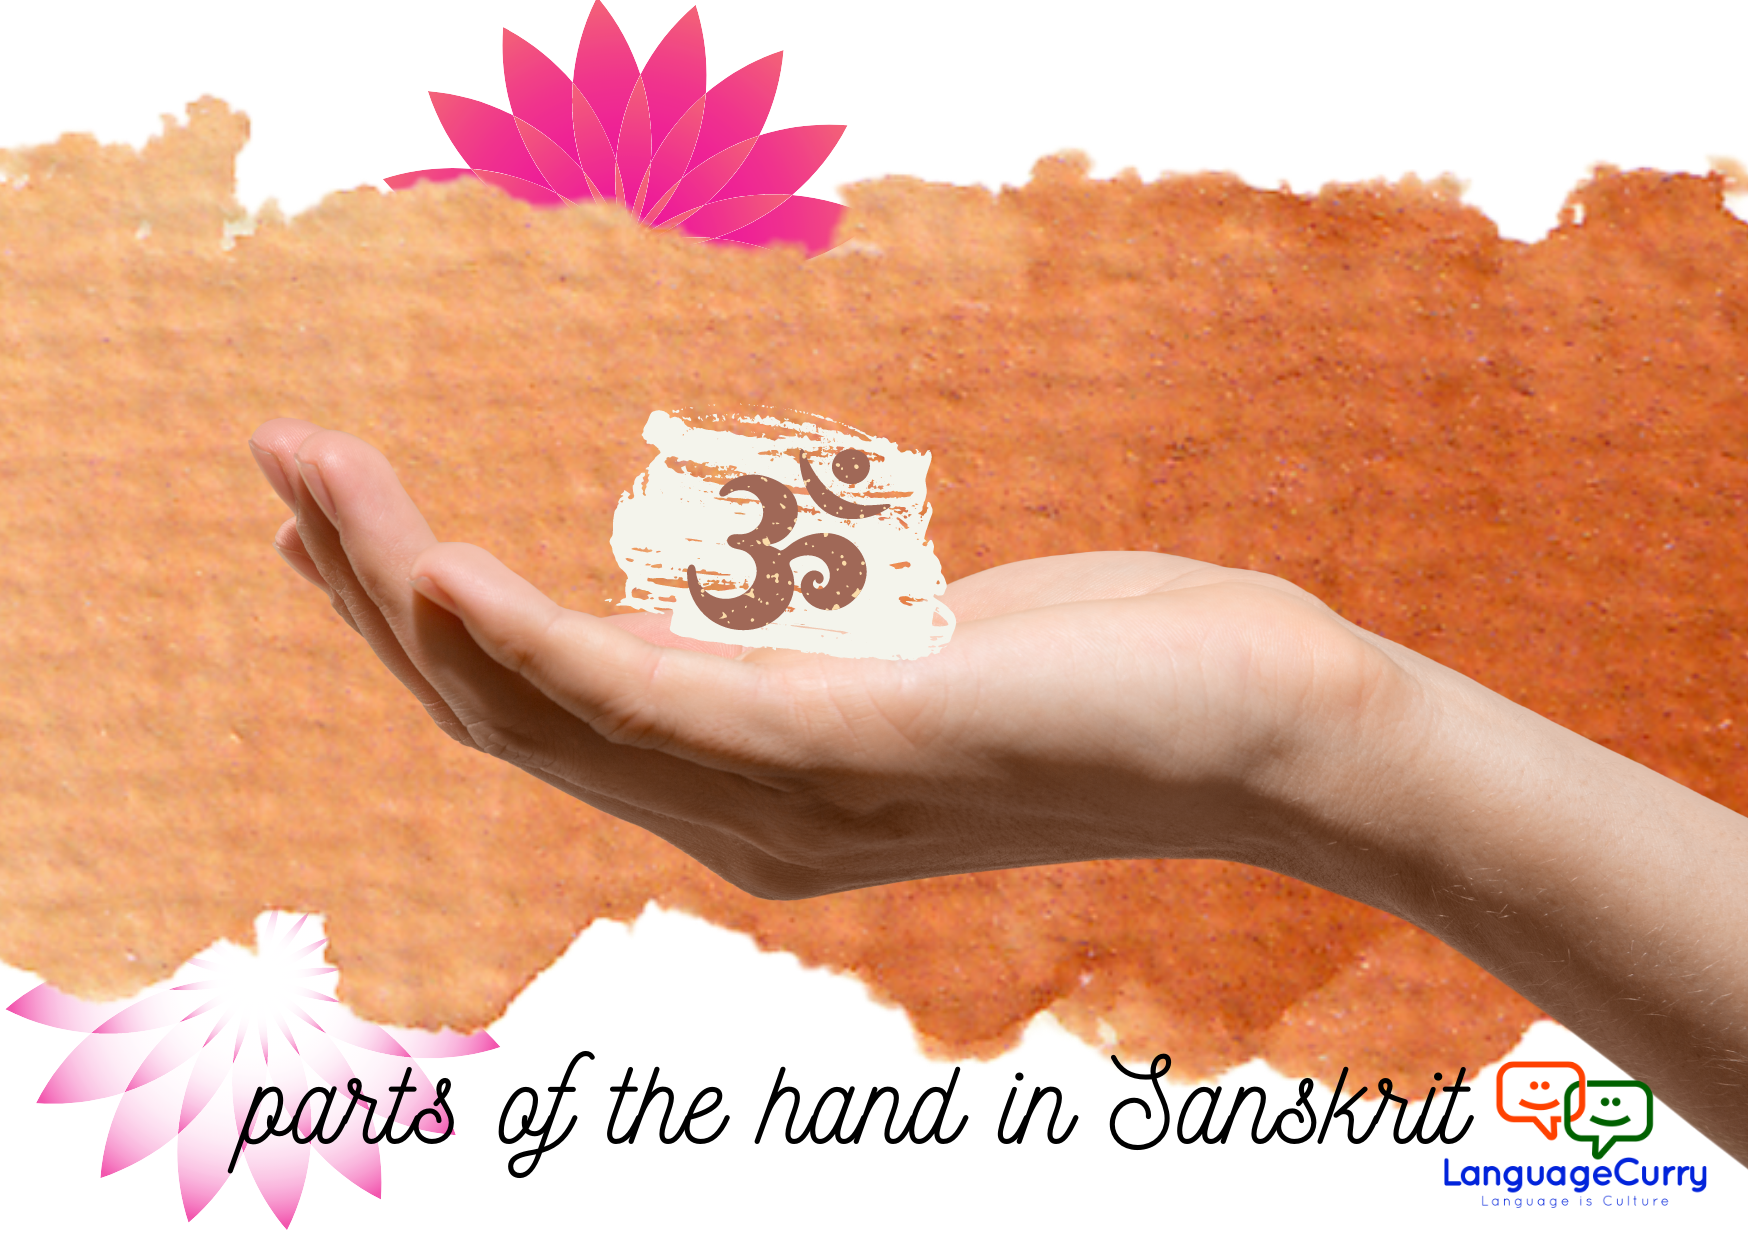 Names of parts of hand in Sanskrit